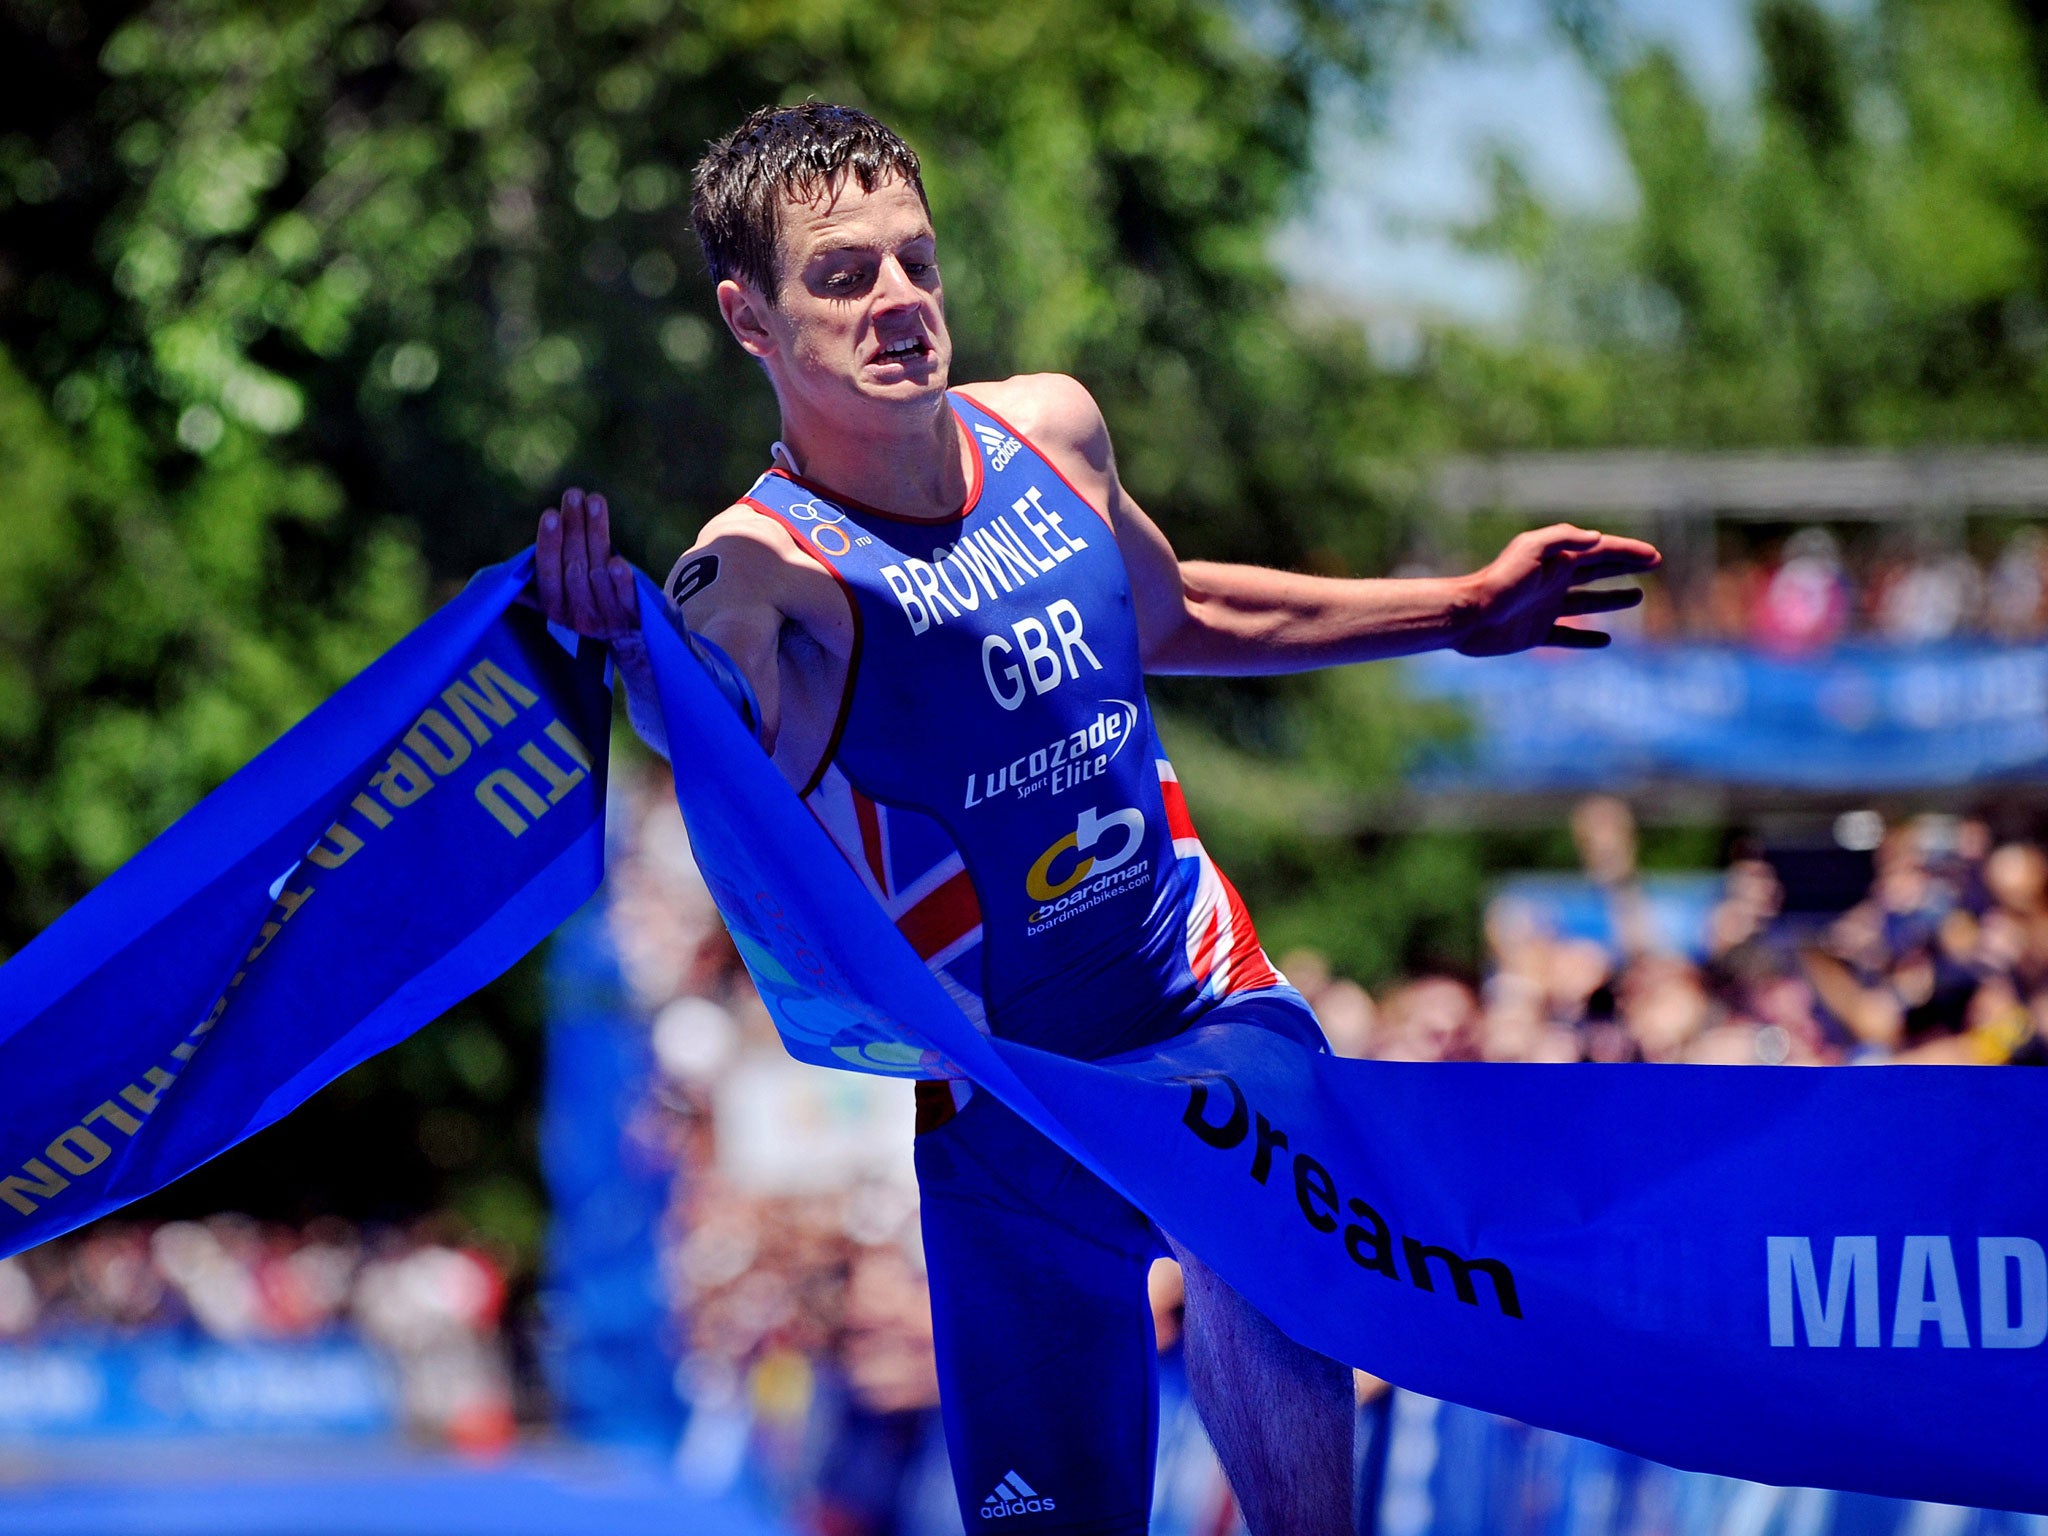 Jonathan Brownlee claimed a second consecutive win in this year's World Triathlon Series